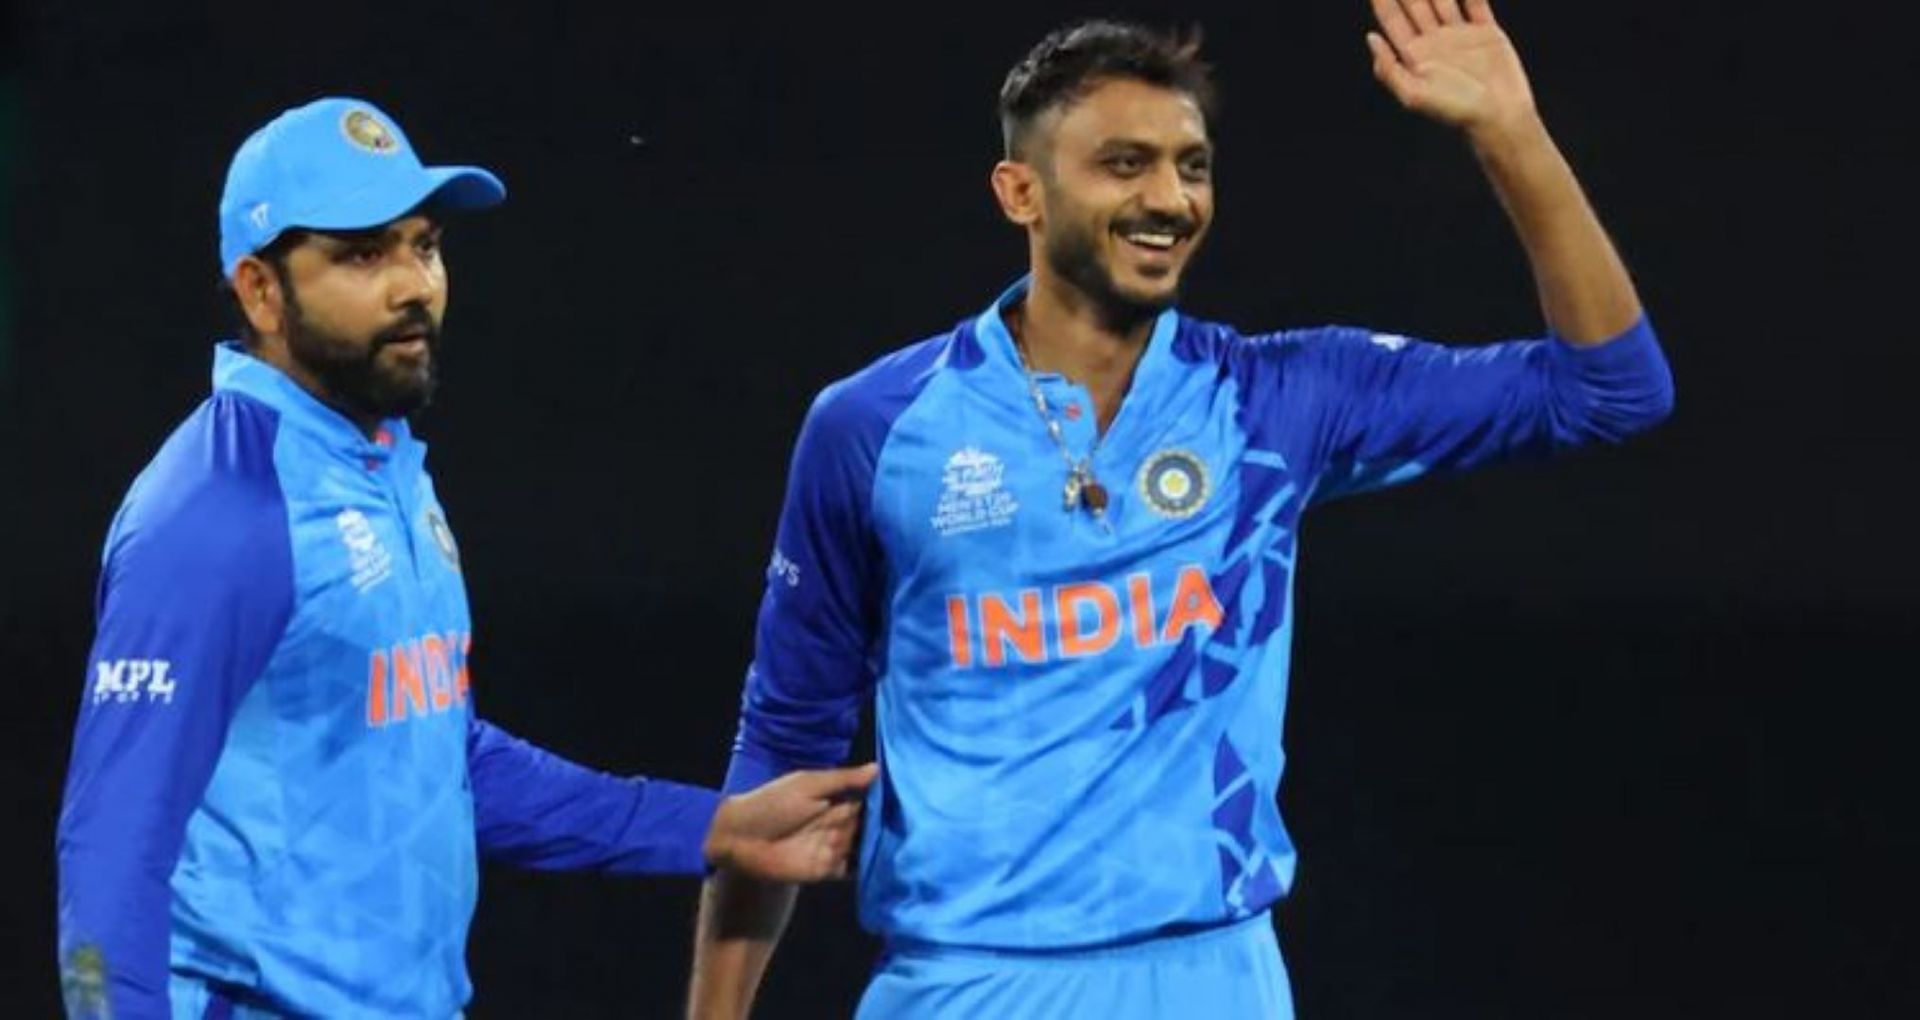 Axar Patel had a forgettable World Cup debut with bat and ball.